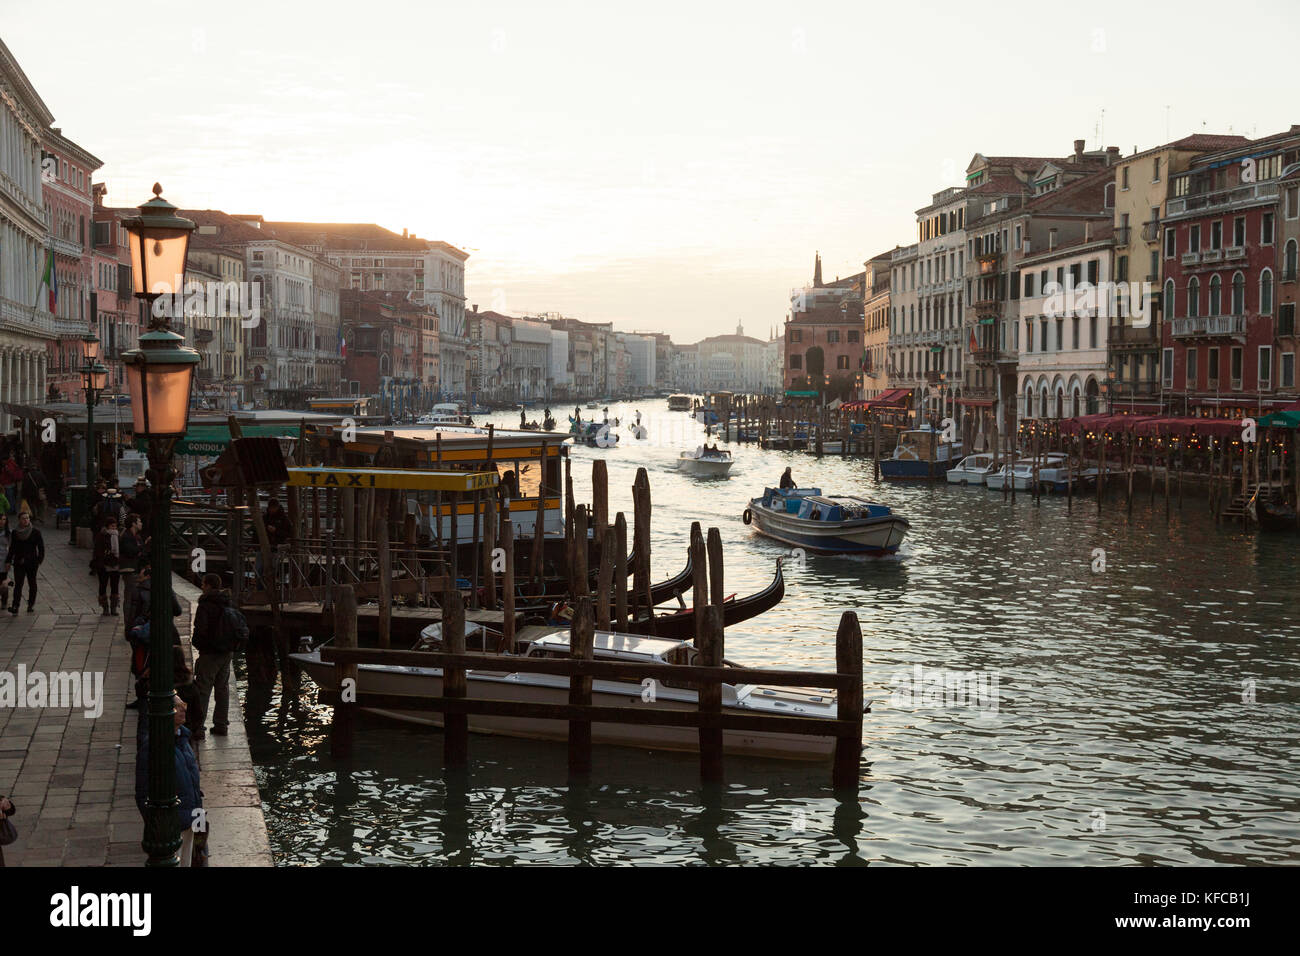 ITALY, Venice. View of the Grand Canal, Homes, Shops and Restaurants at sunset from the Rialto Bridge. Stock Photo